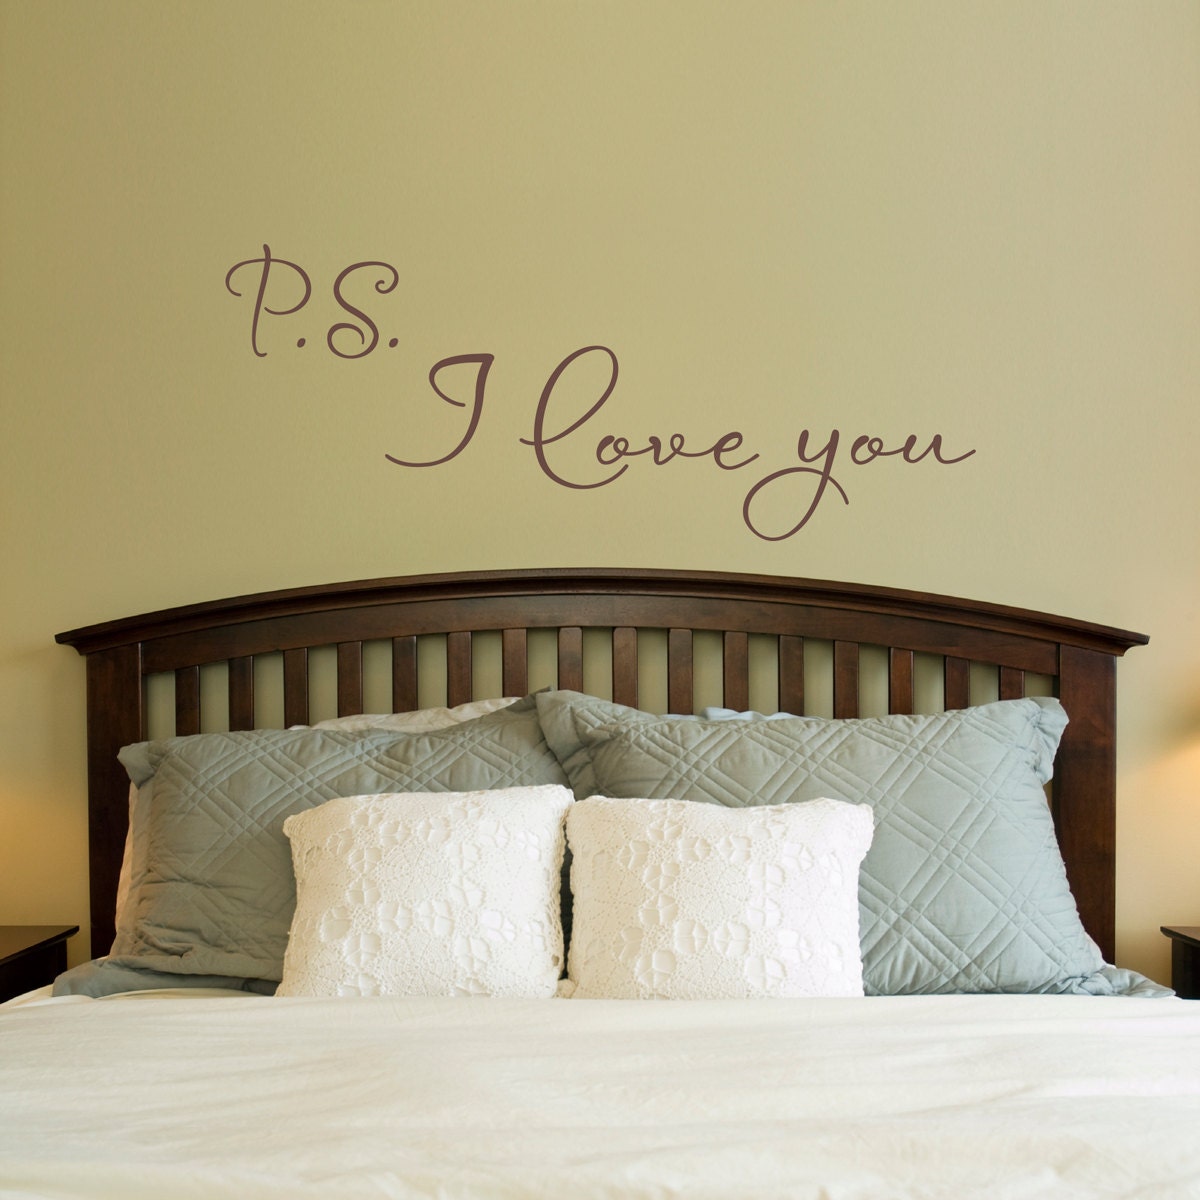 P.S. I Love You Wall Decal - Love Decal - Bedroom Wall Sticker - Large